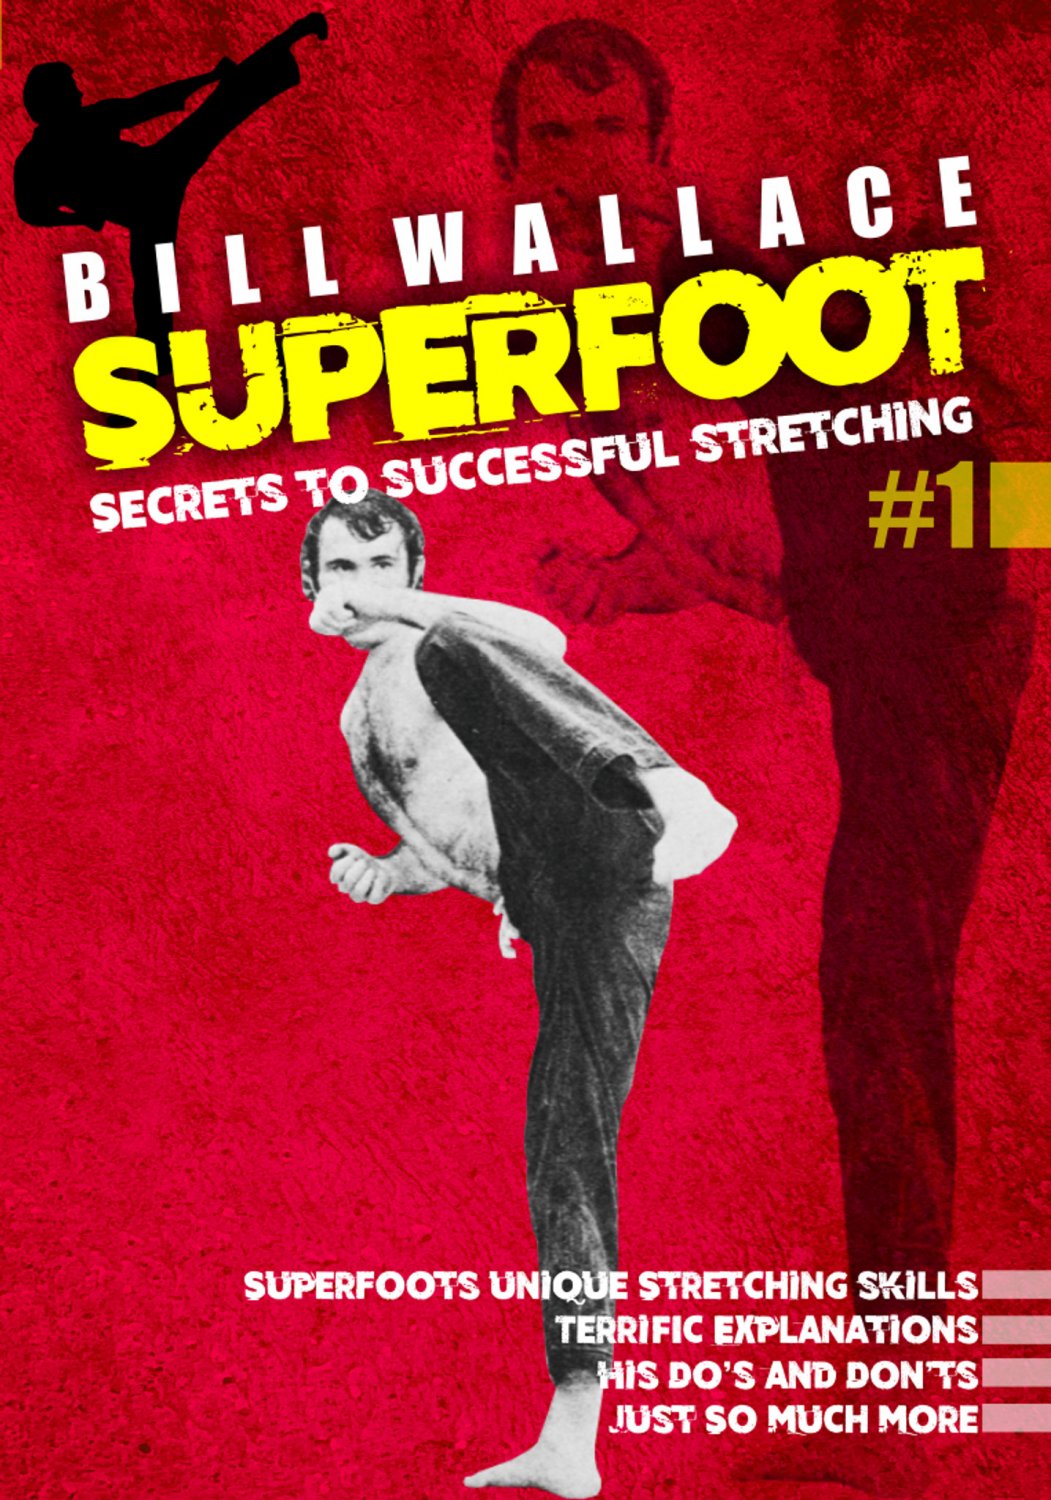 VD9575A  Bill Superfoot Wallace Secrets to Successful Stretching #1 DVD Do's & Don'ts